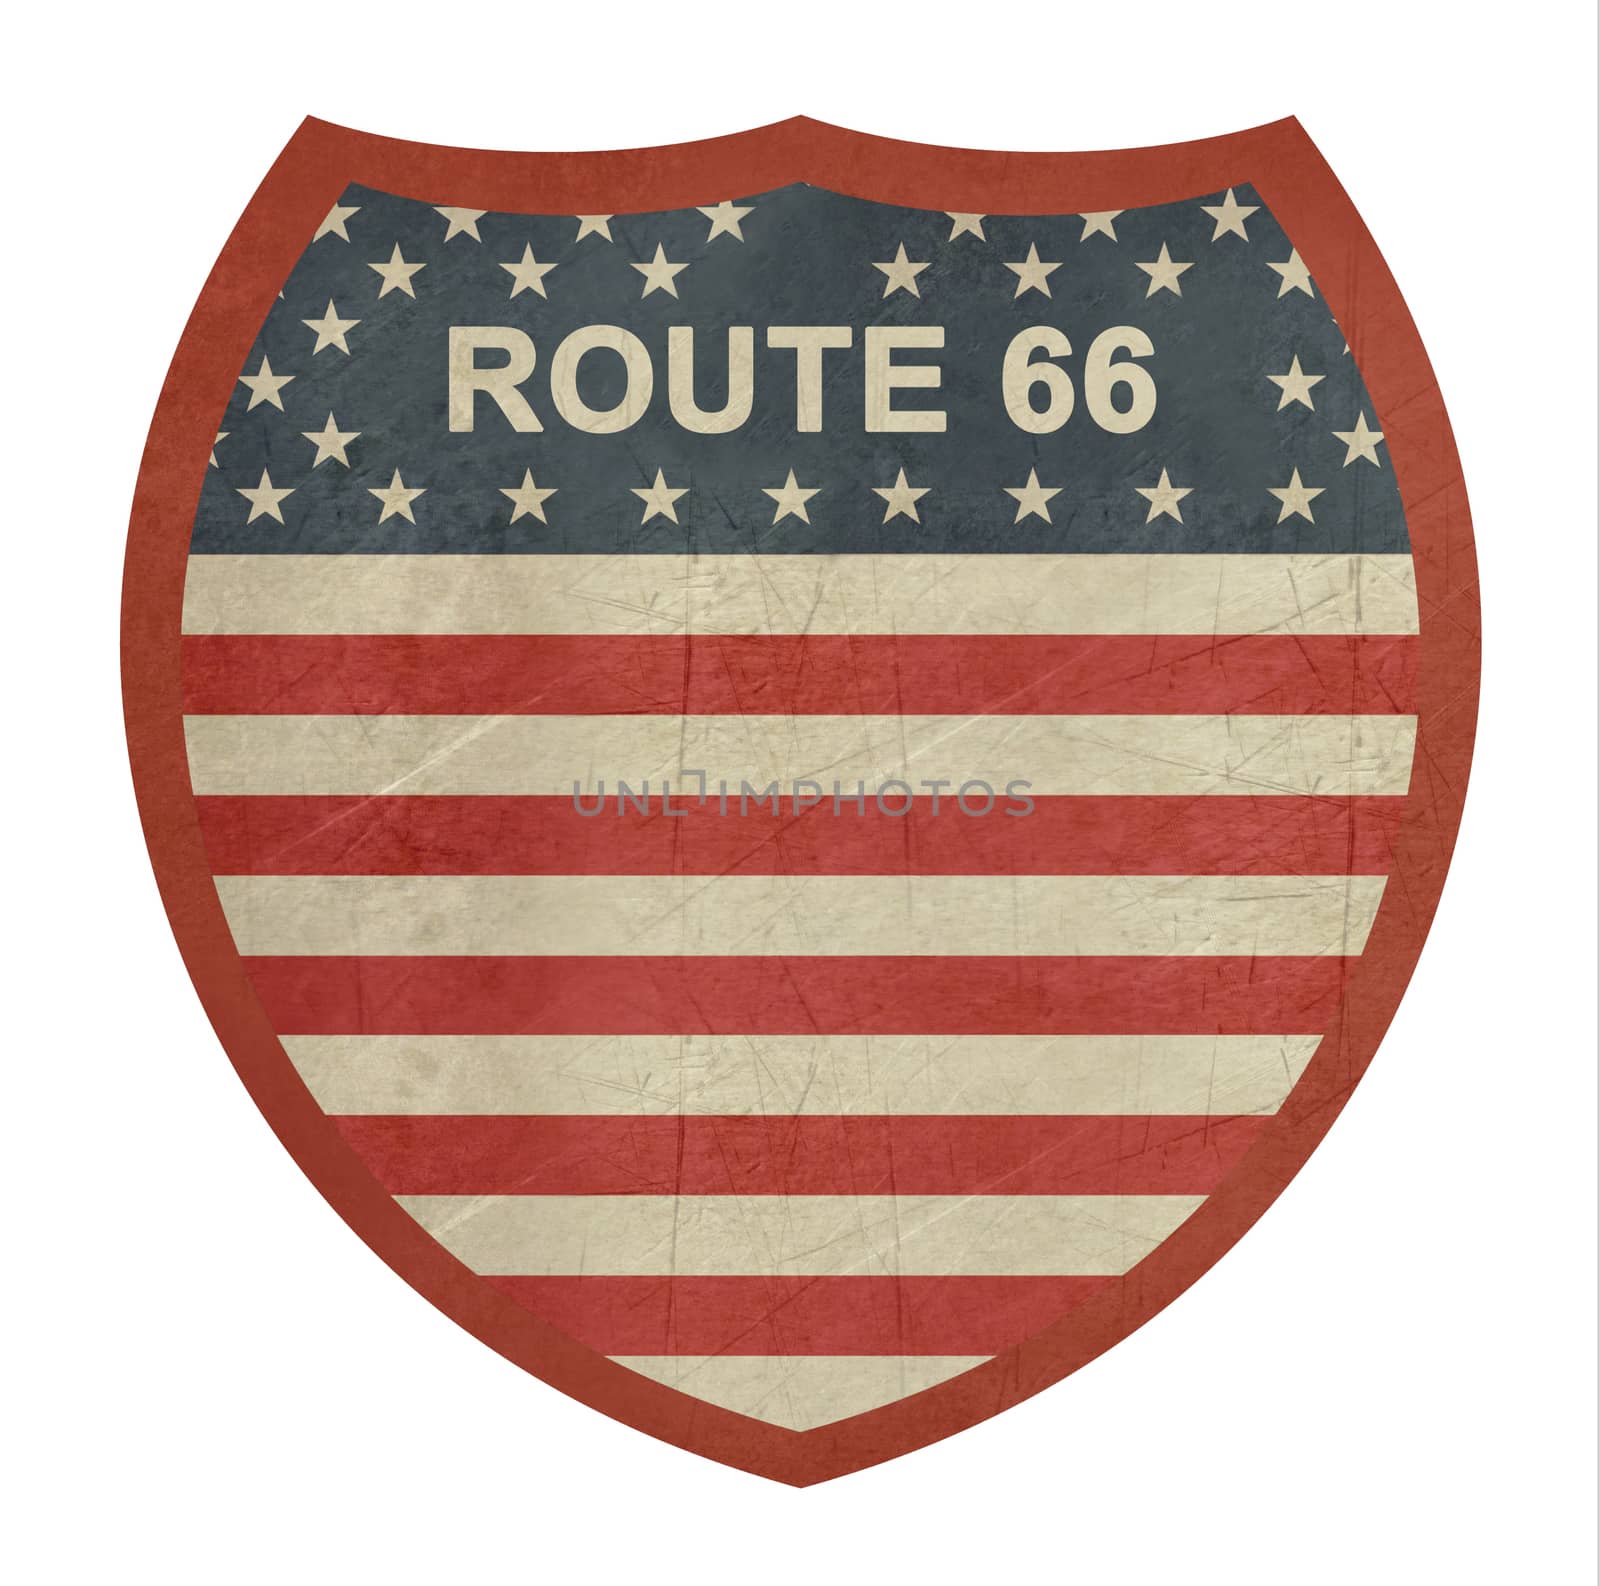 Grunge American route 66 highway sign isolated on a white background.